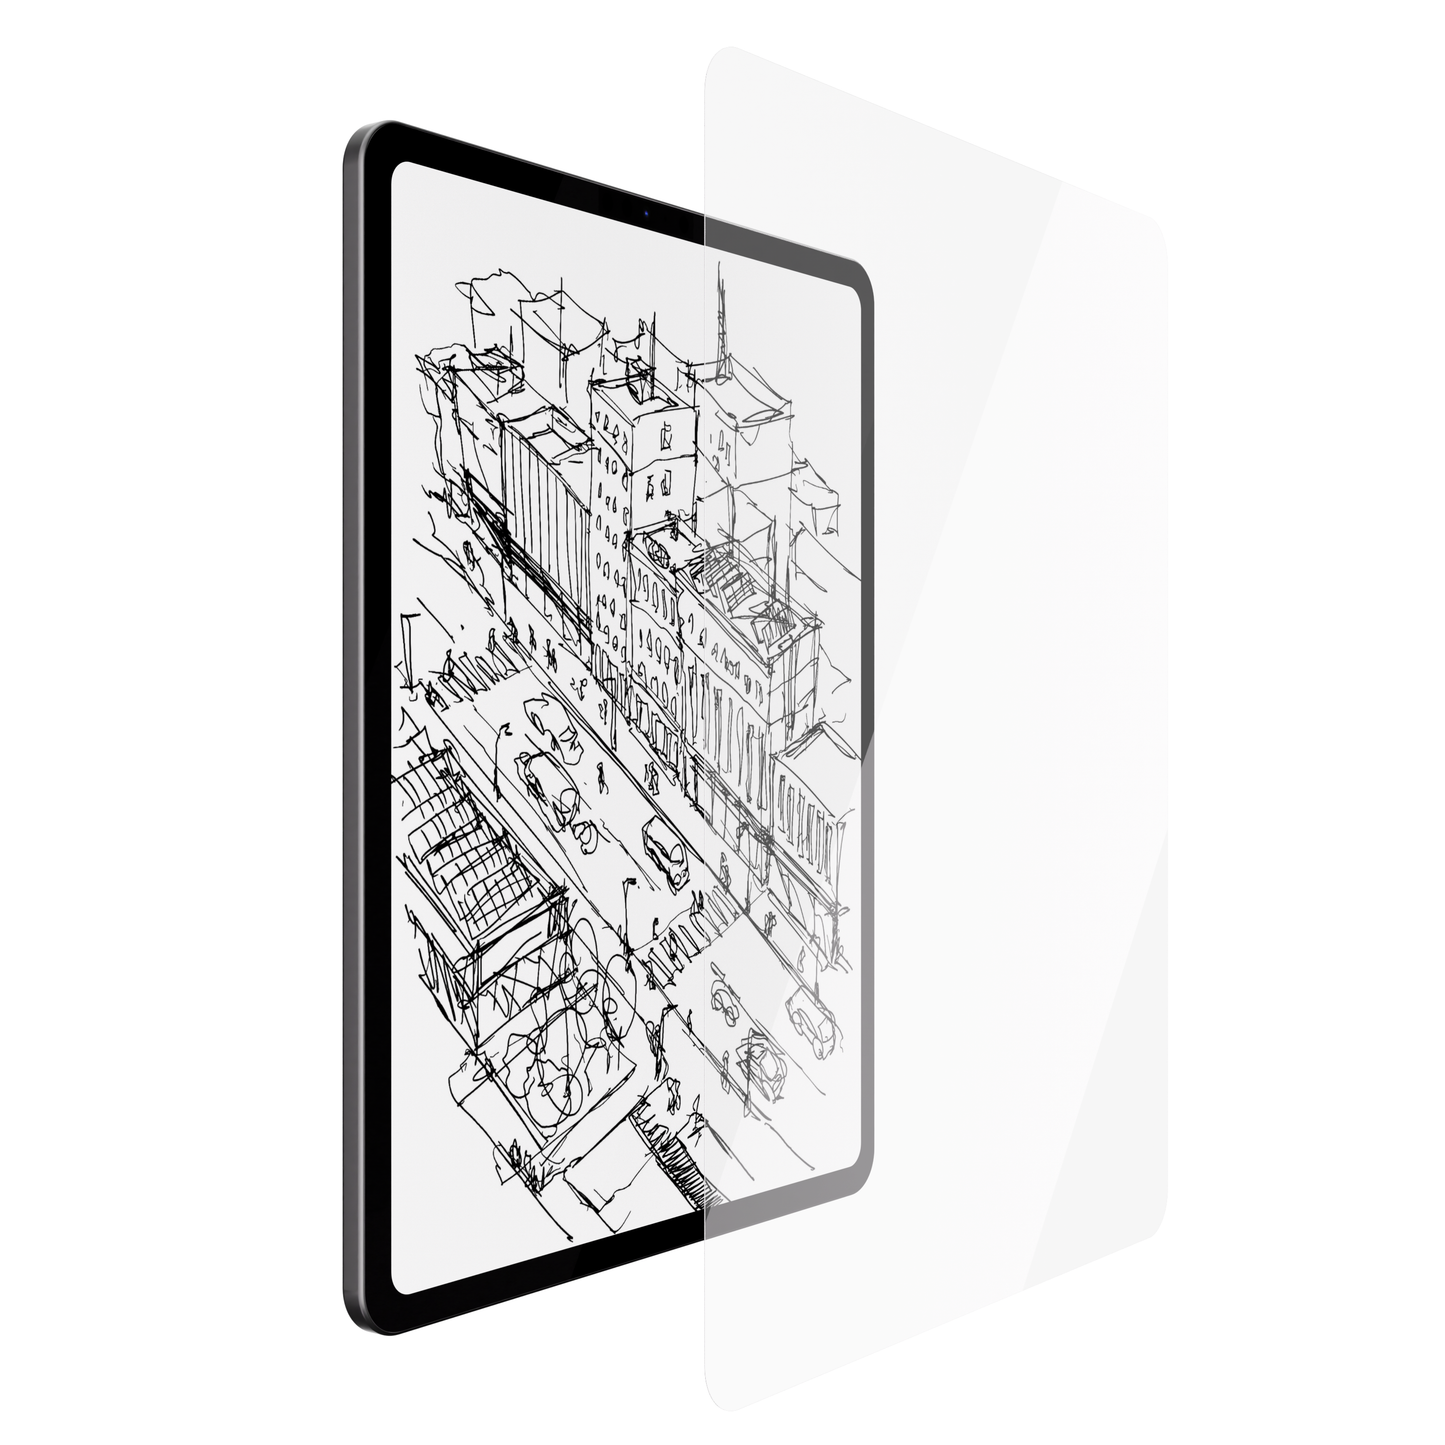 NEXT.ONE Scribble Paper Screen Protector - iPad Pro 12.9" (2022)